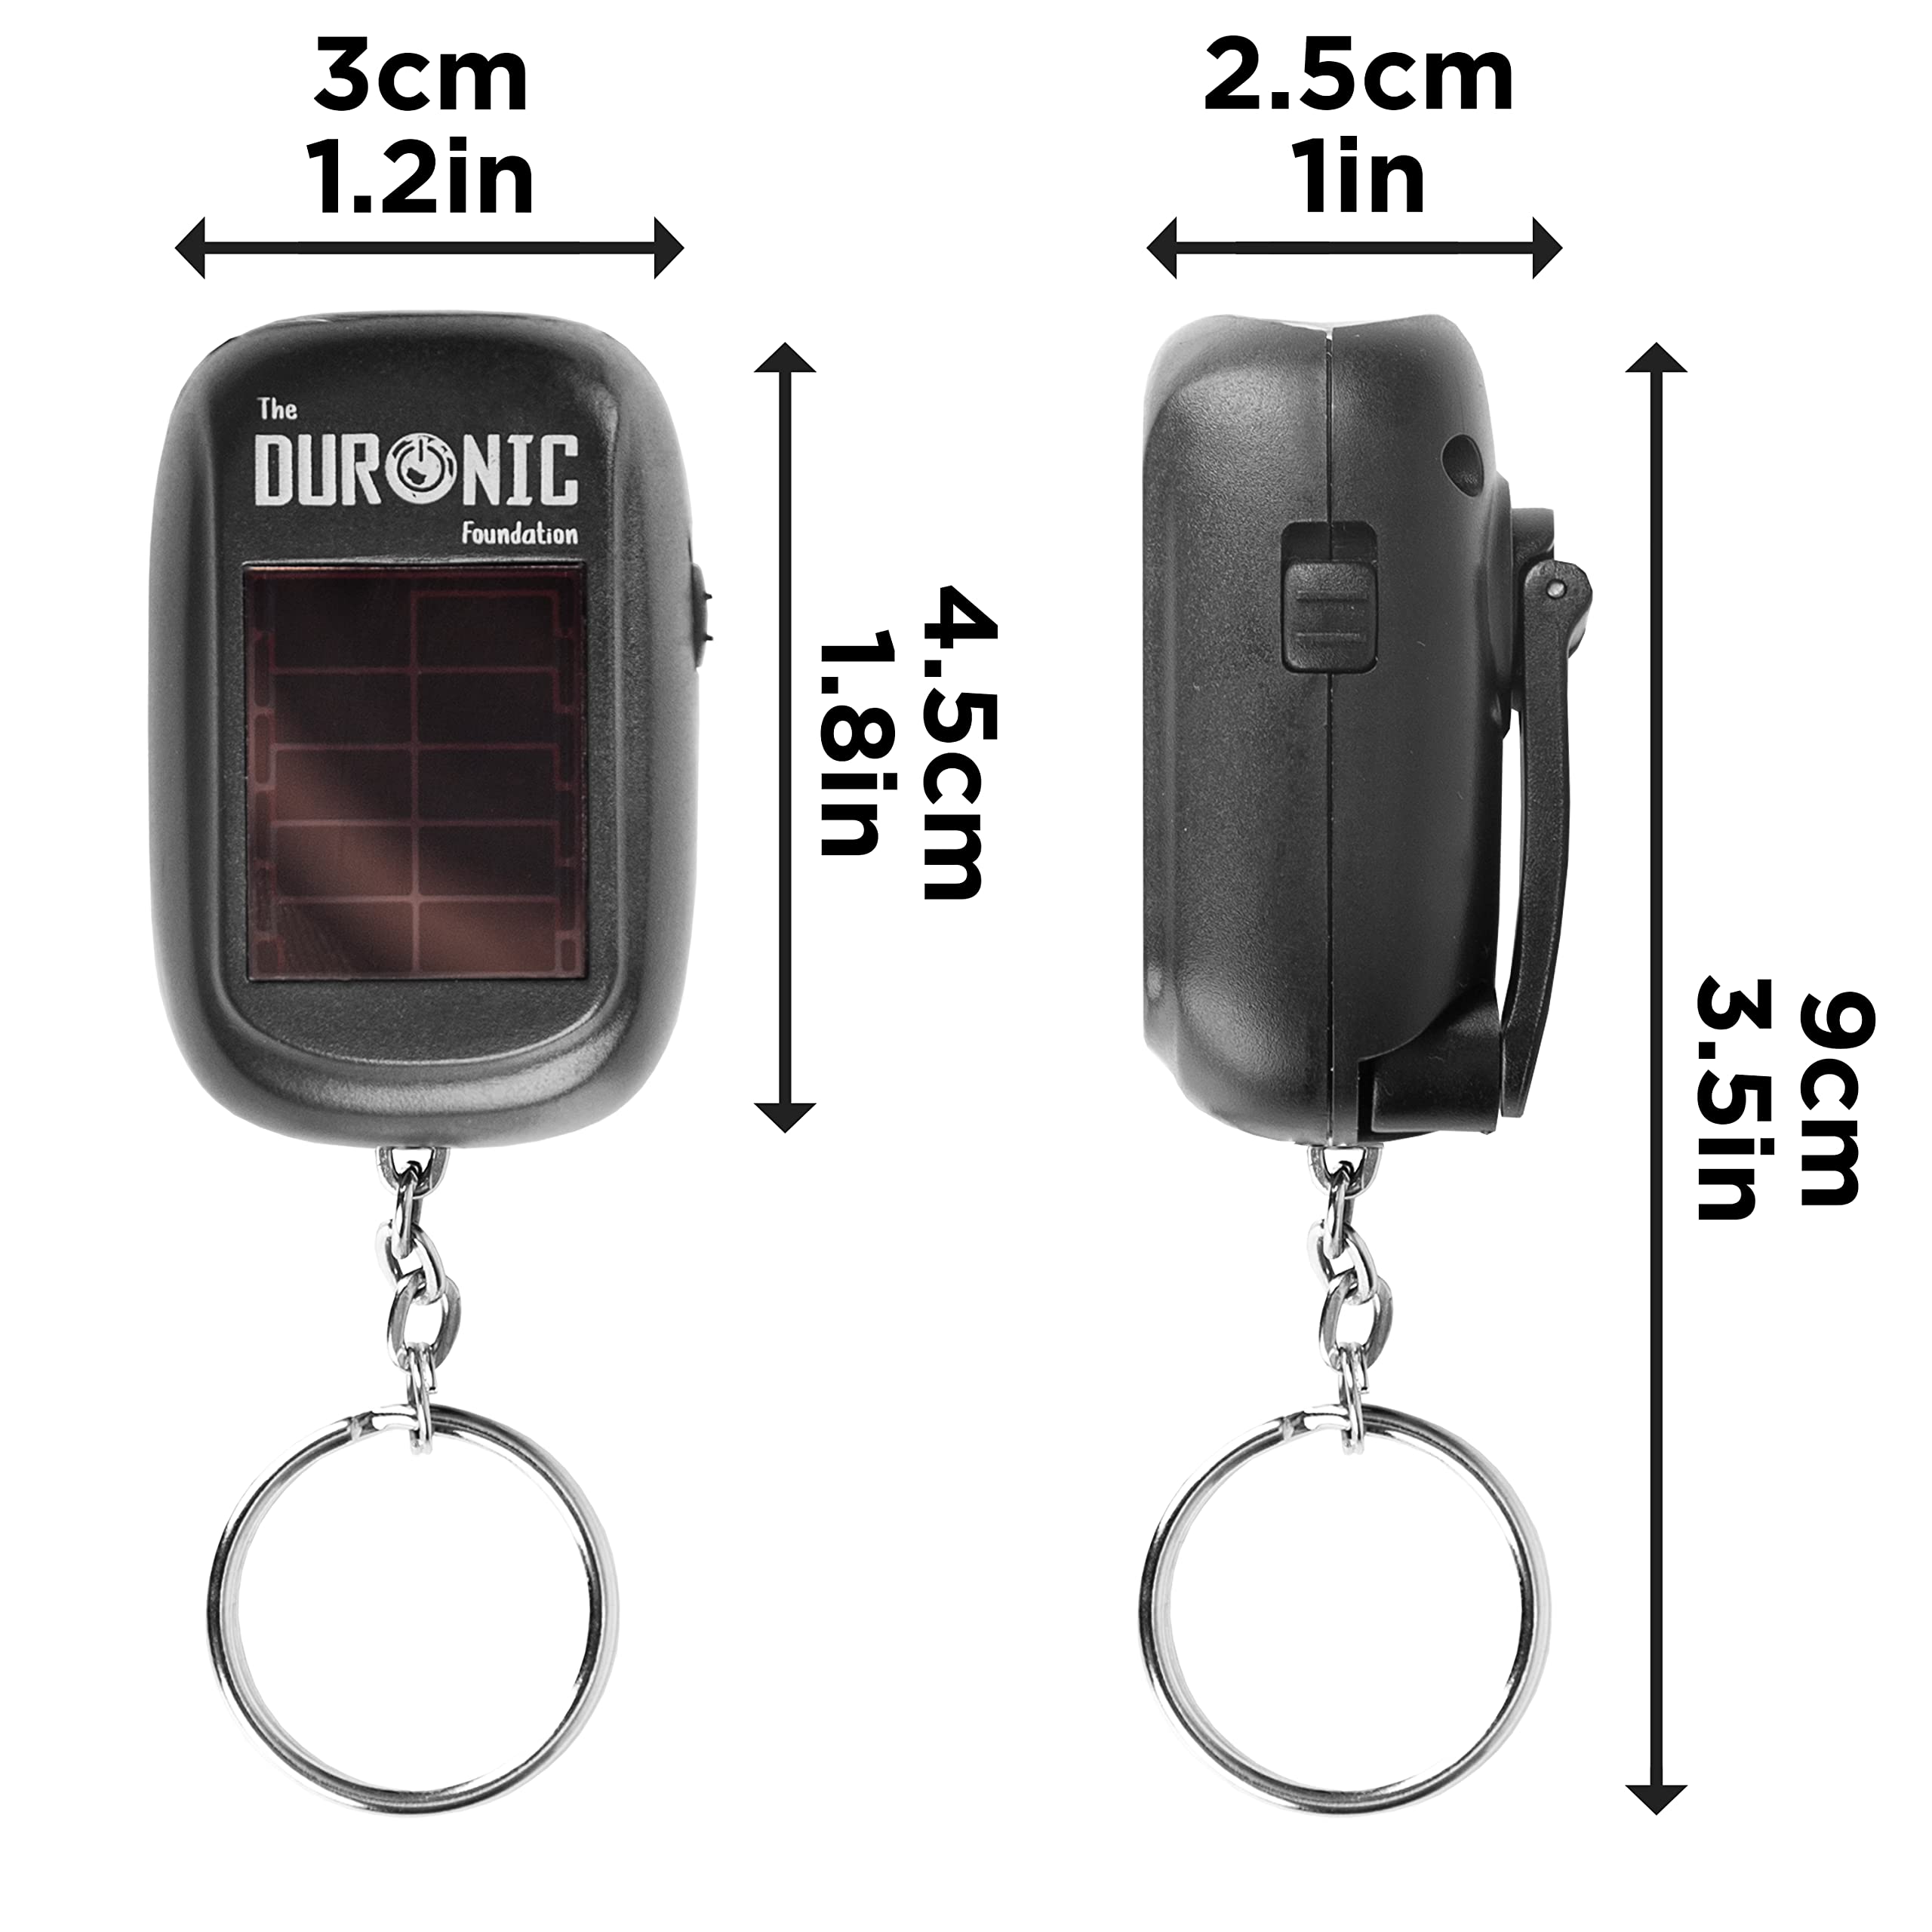 Duronic Keyring LED Torch DF01, Pocket Flashlight, 2-Way Charging - Wind Up and Solar Panel, Eco, Crank Handle Rechargeable, 8 Lumens, Dynamo Keychain Light, No Batteries Needed